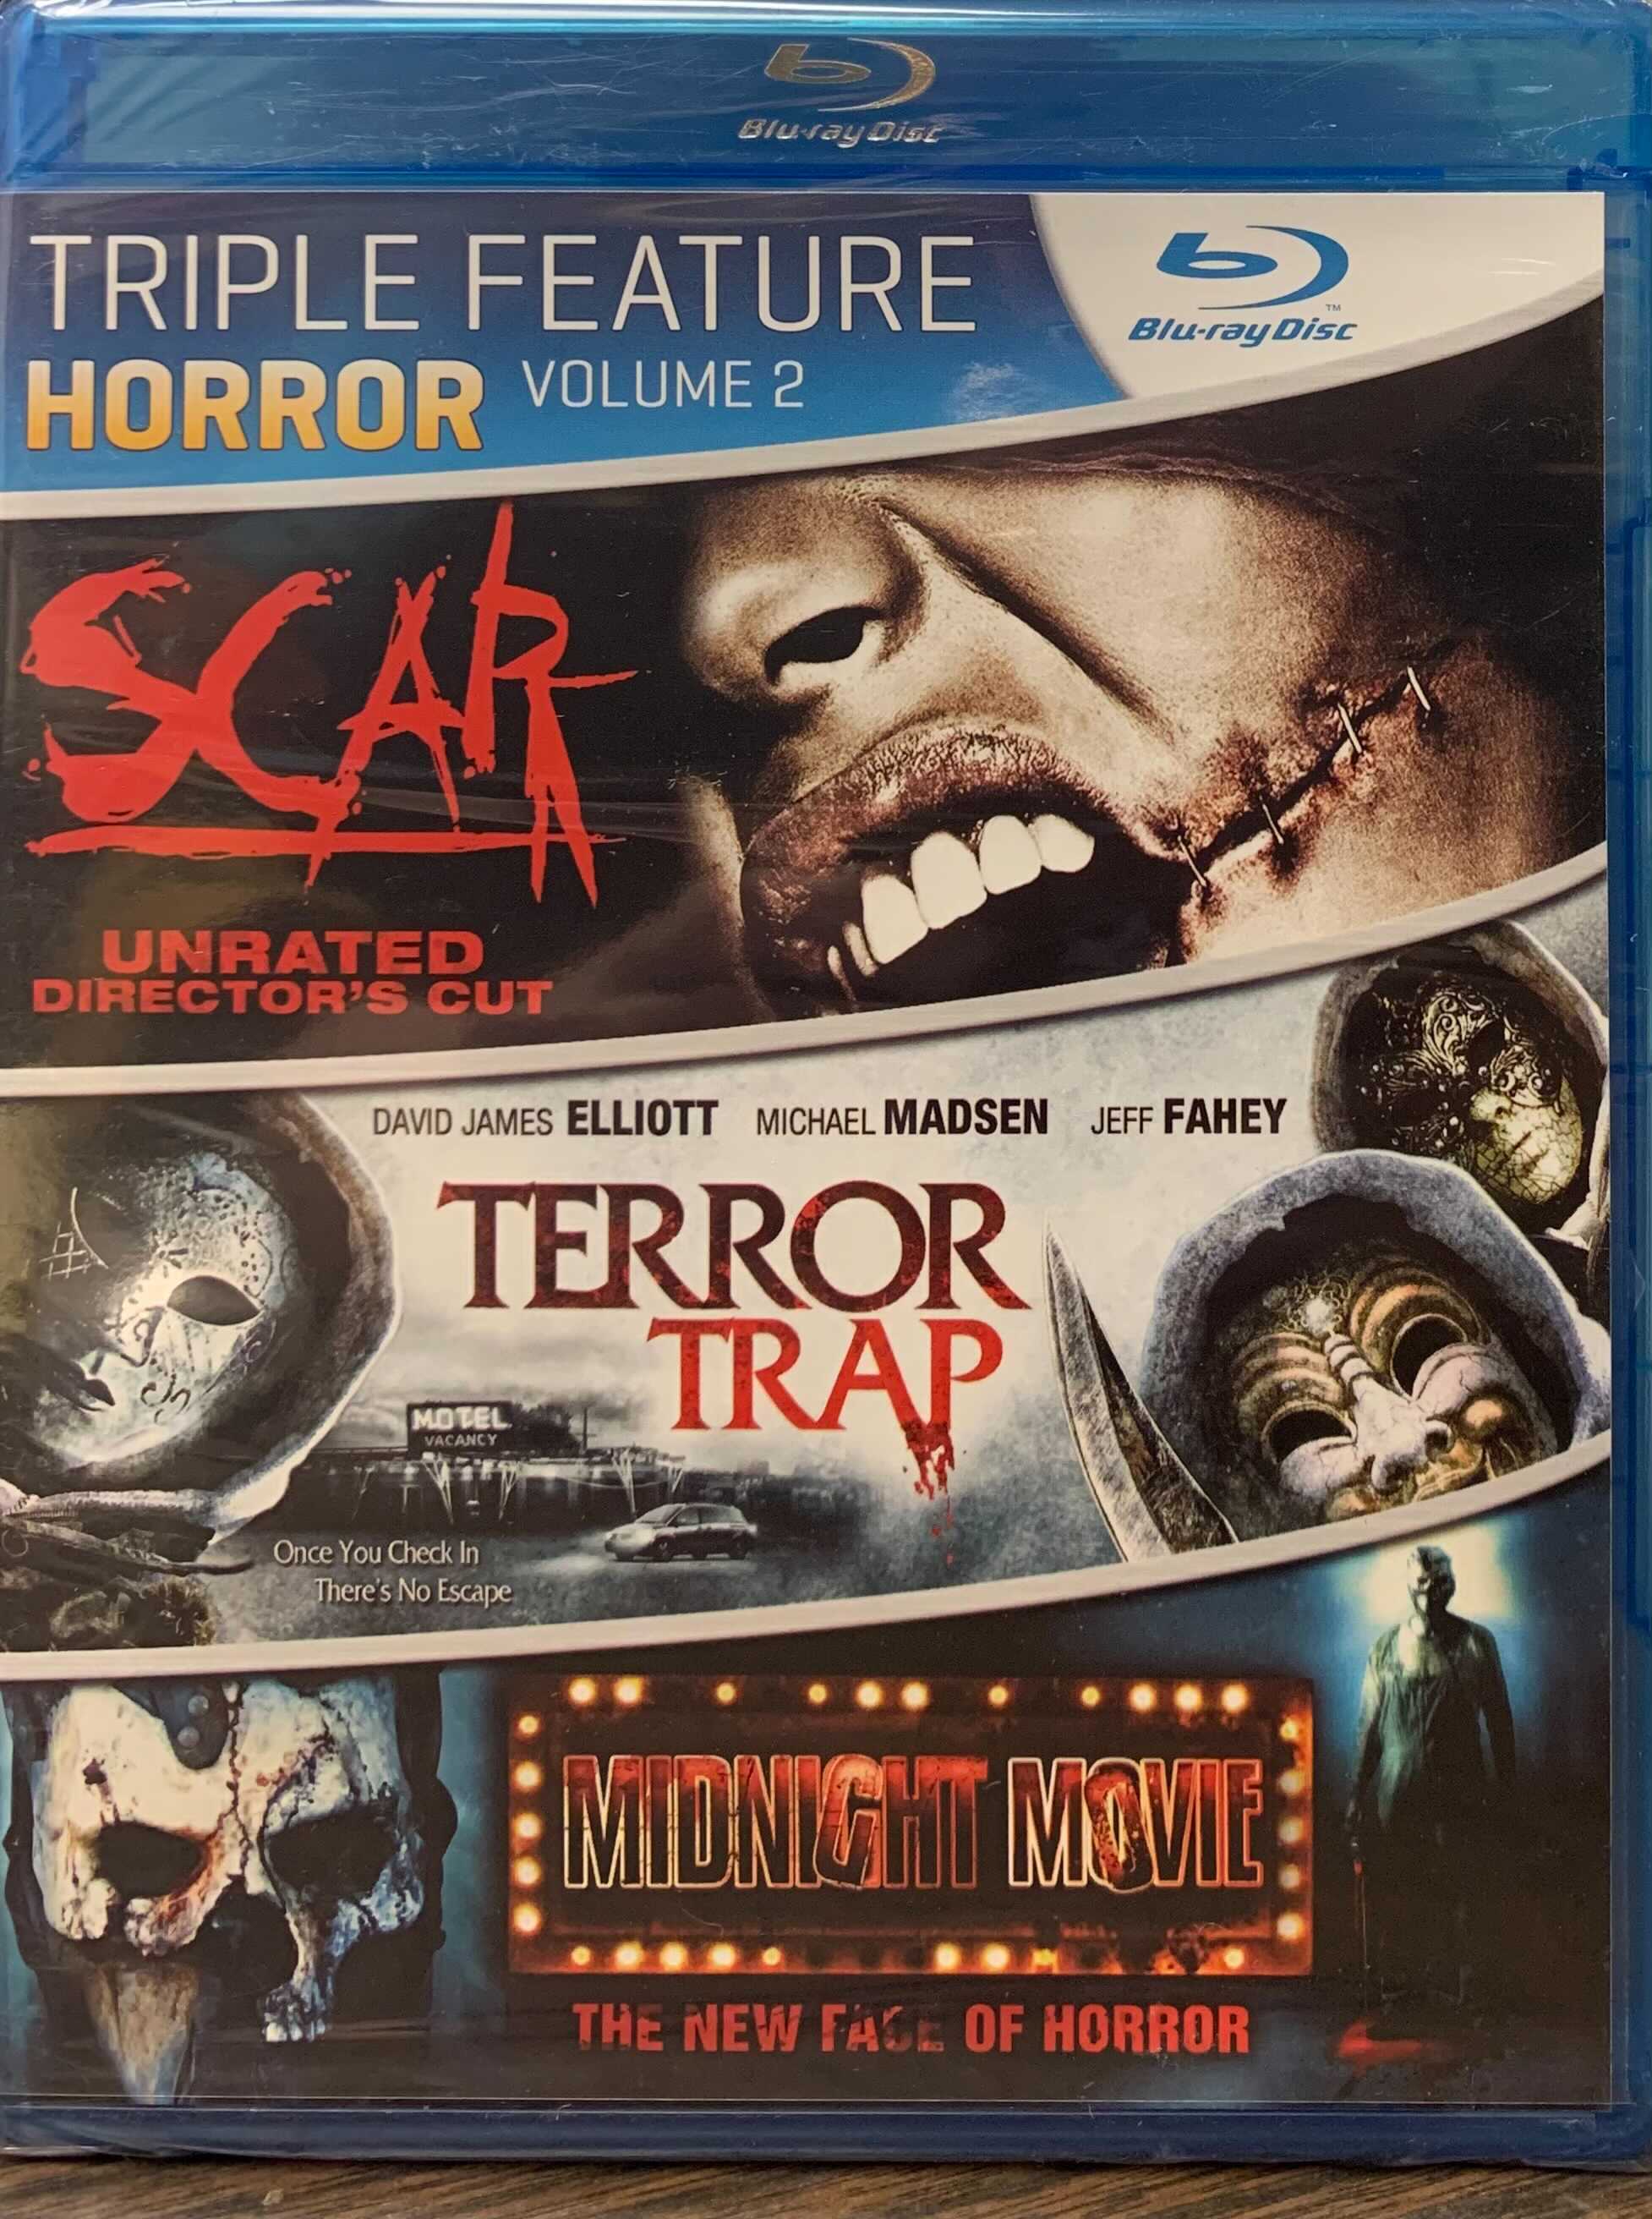 Triple Feature Horror Volume 2: Scar (Unrated Director's Cut) / Terror Trap / Midnight Movie Blu-ray